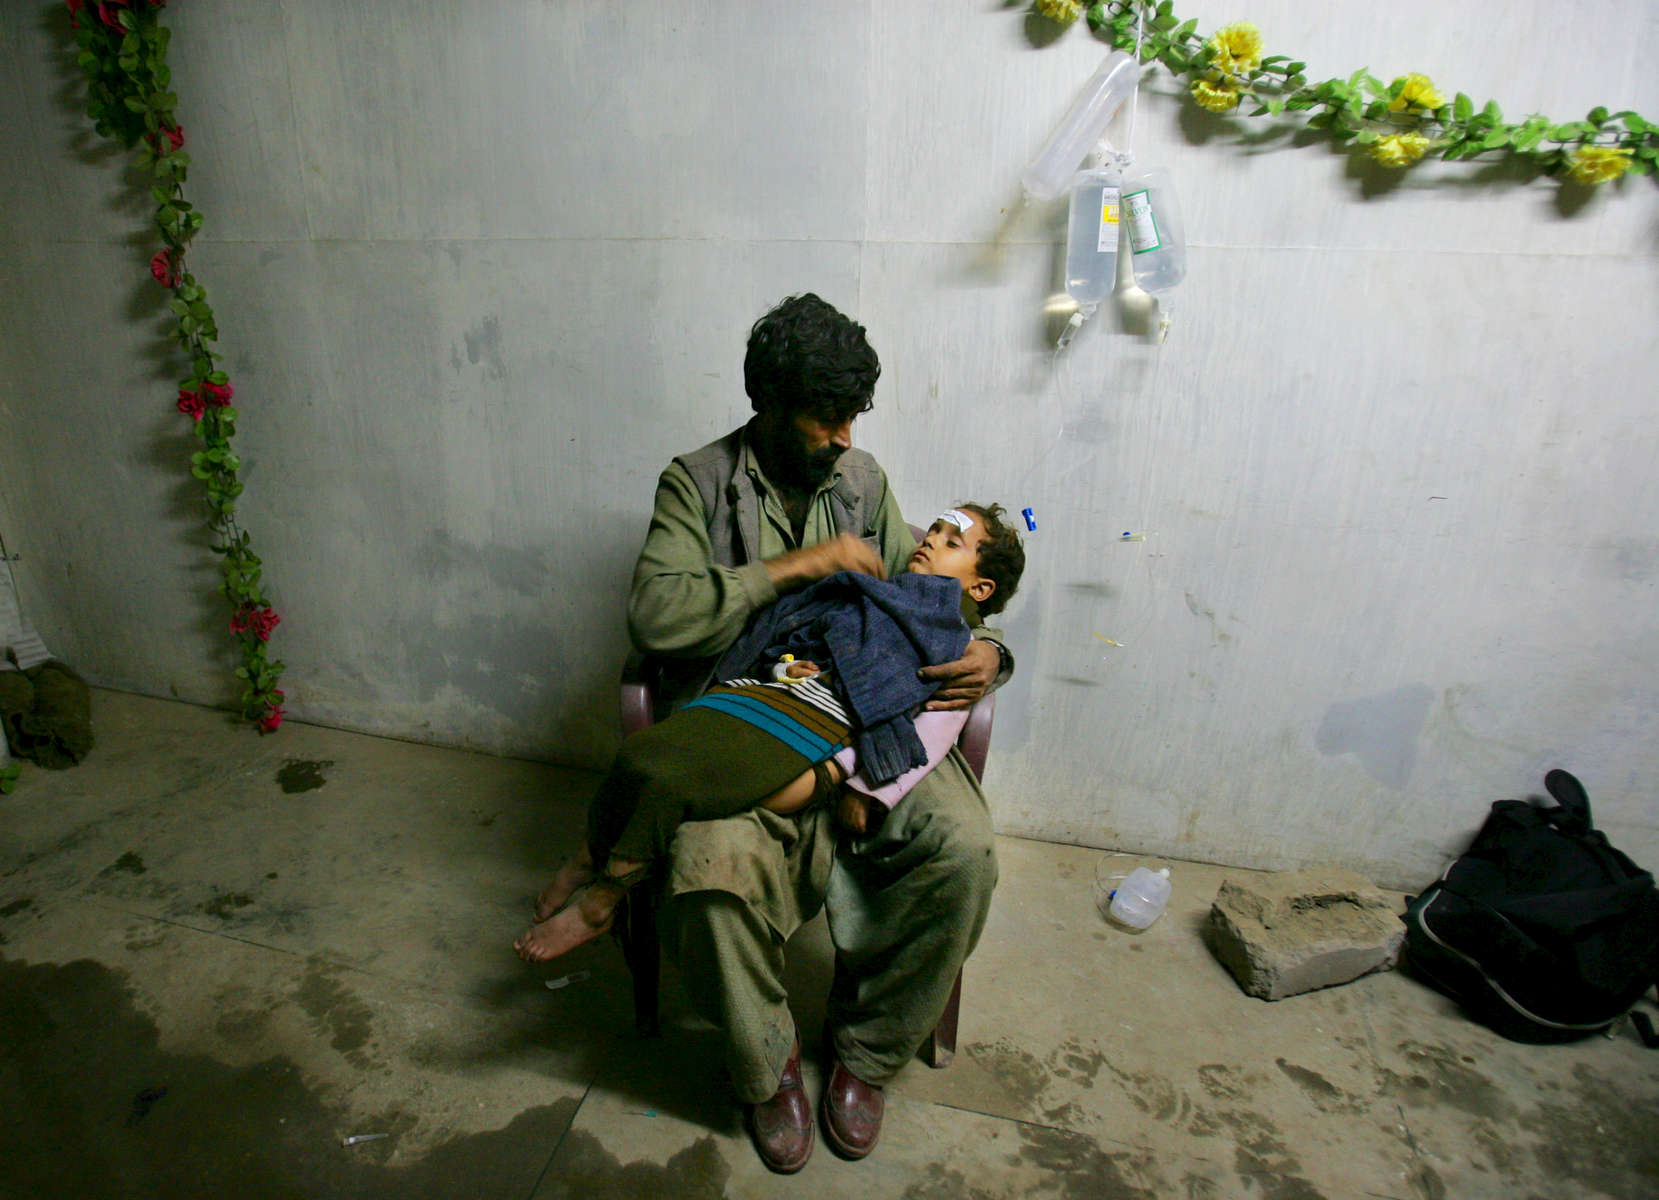 BALAKOT, PAKISTAN: A father holds his daughter  awaiting medical treatment at a makeshift trauma facility where earthquake survivors were brought in by helicopter from remote villages.  A devastating earthquake measuring 7.6 on the Richter scale hit northern Pakistan and neighboring India in early October leaving up to 3 million people homeless in Pakistan, killing almost 80,000 in Pakistan and another 1,400 in Indian-Kashmir. Rescue efforts were complicated by the remote mountainous landscape and the vast areas effected leaving the people in desperate situations. The injured were trapped for days with little food and no shelter as roads were blocked by landslides until helicopters were able to rescue the victims. Aid agencies could barely grasp the enormity of the natural disaster, the worst in Pakistan’s history. 